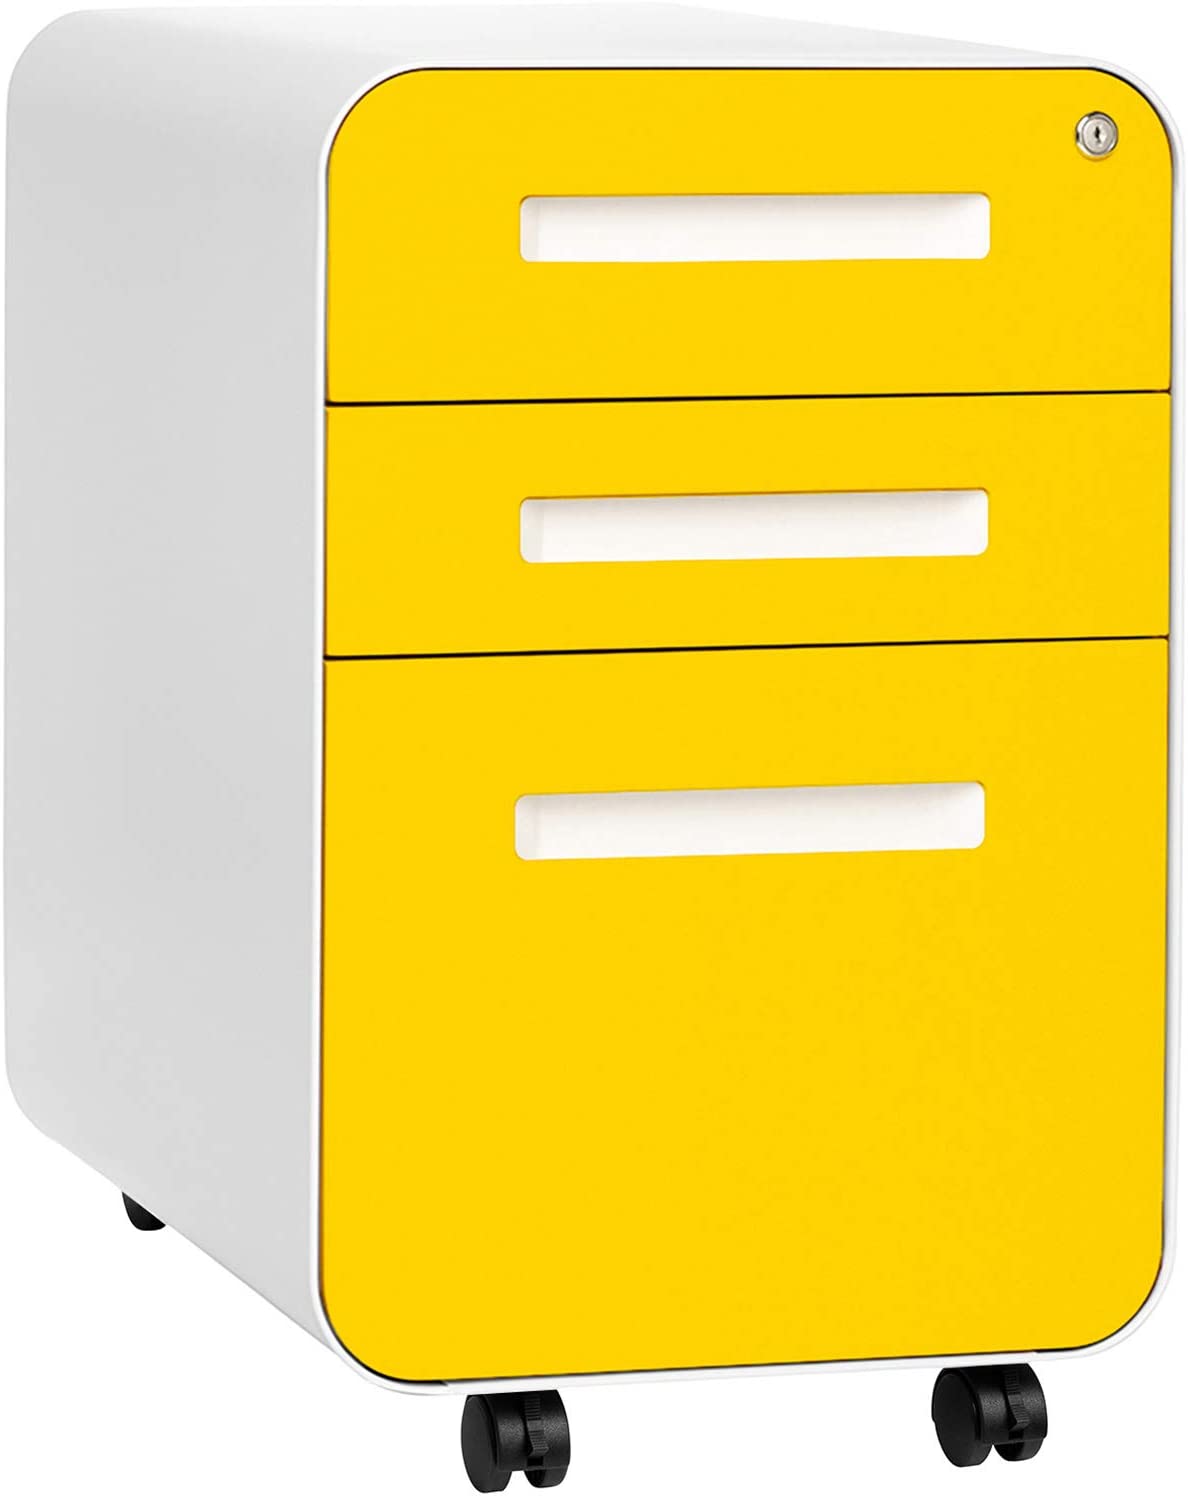 Stockpile 3-Drawer Mobile File Cabinet (yellow, also available in all white, black, and many other colors)